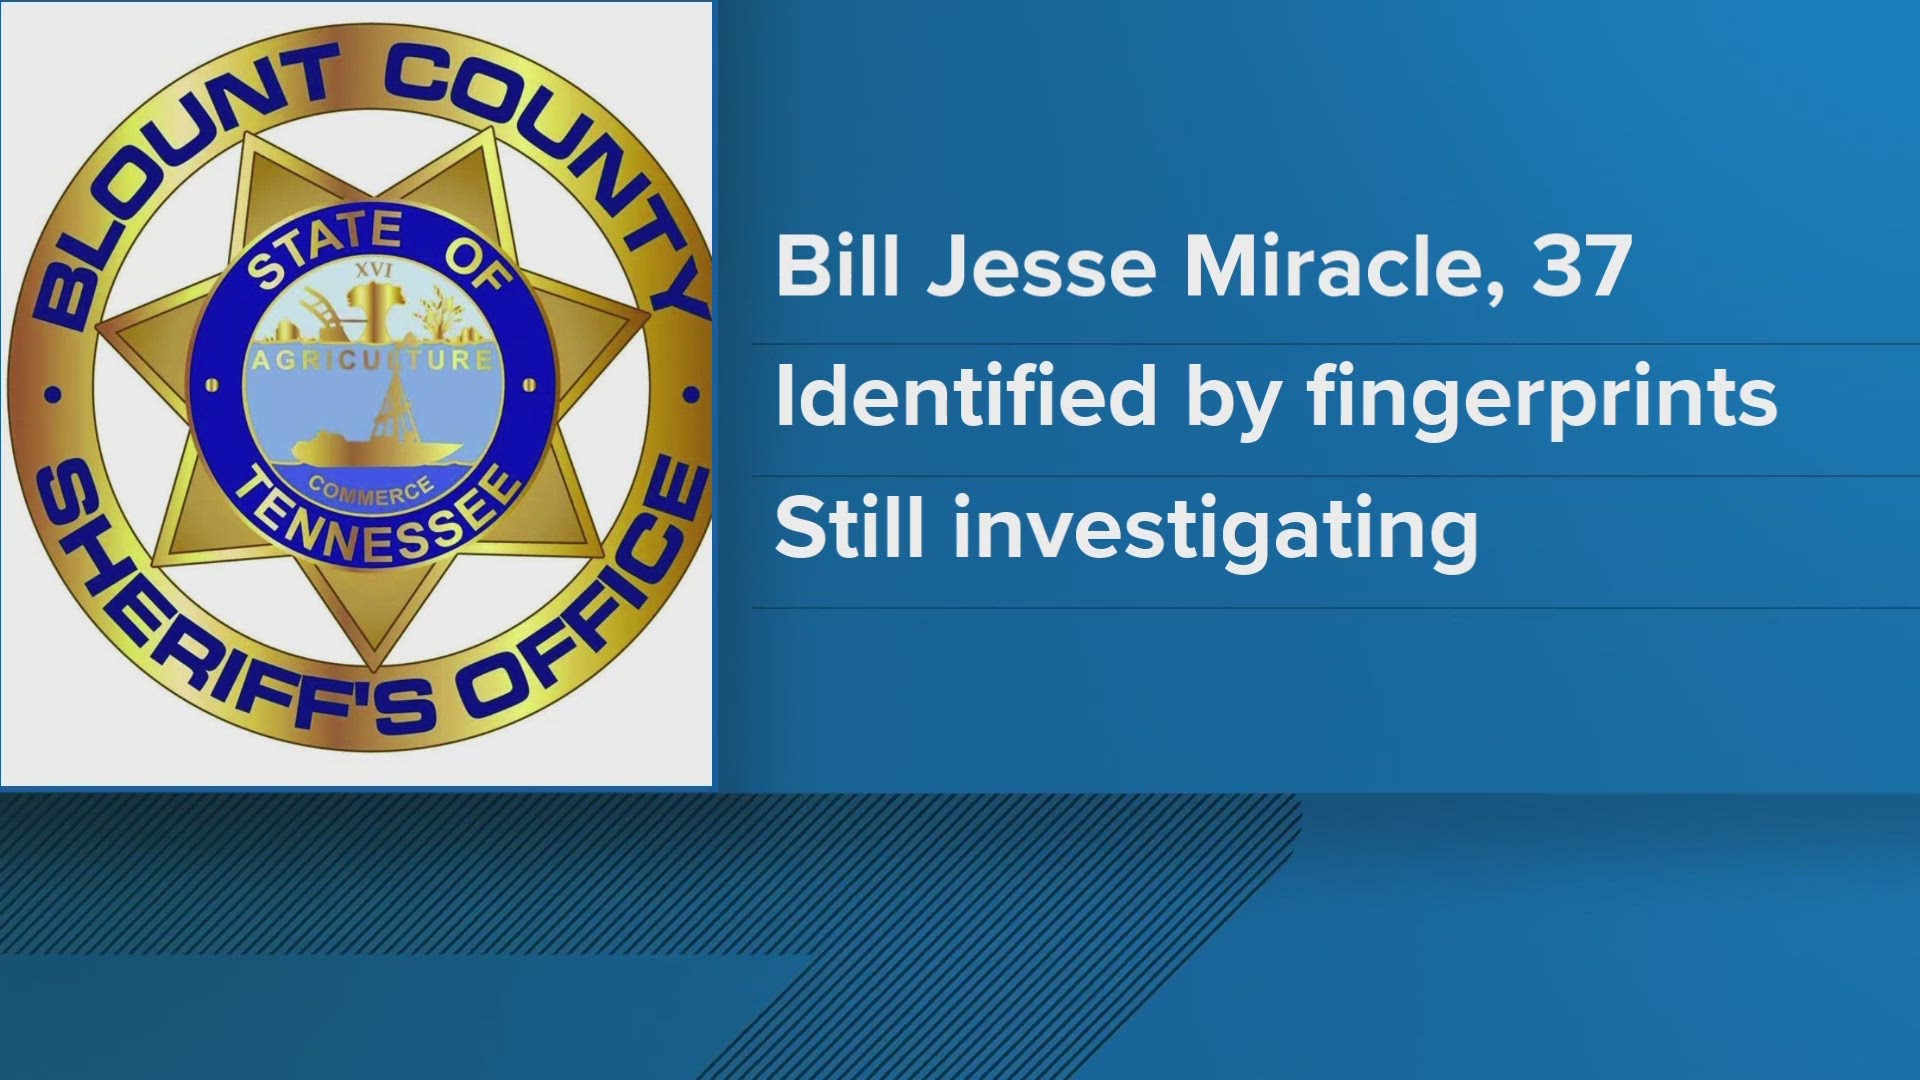 Investigators with the Blount County Sheriff's office say 36-year-old Bill Jesse Miracle died. His body was found last week.